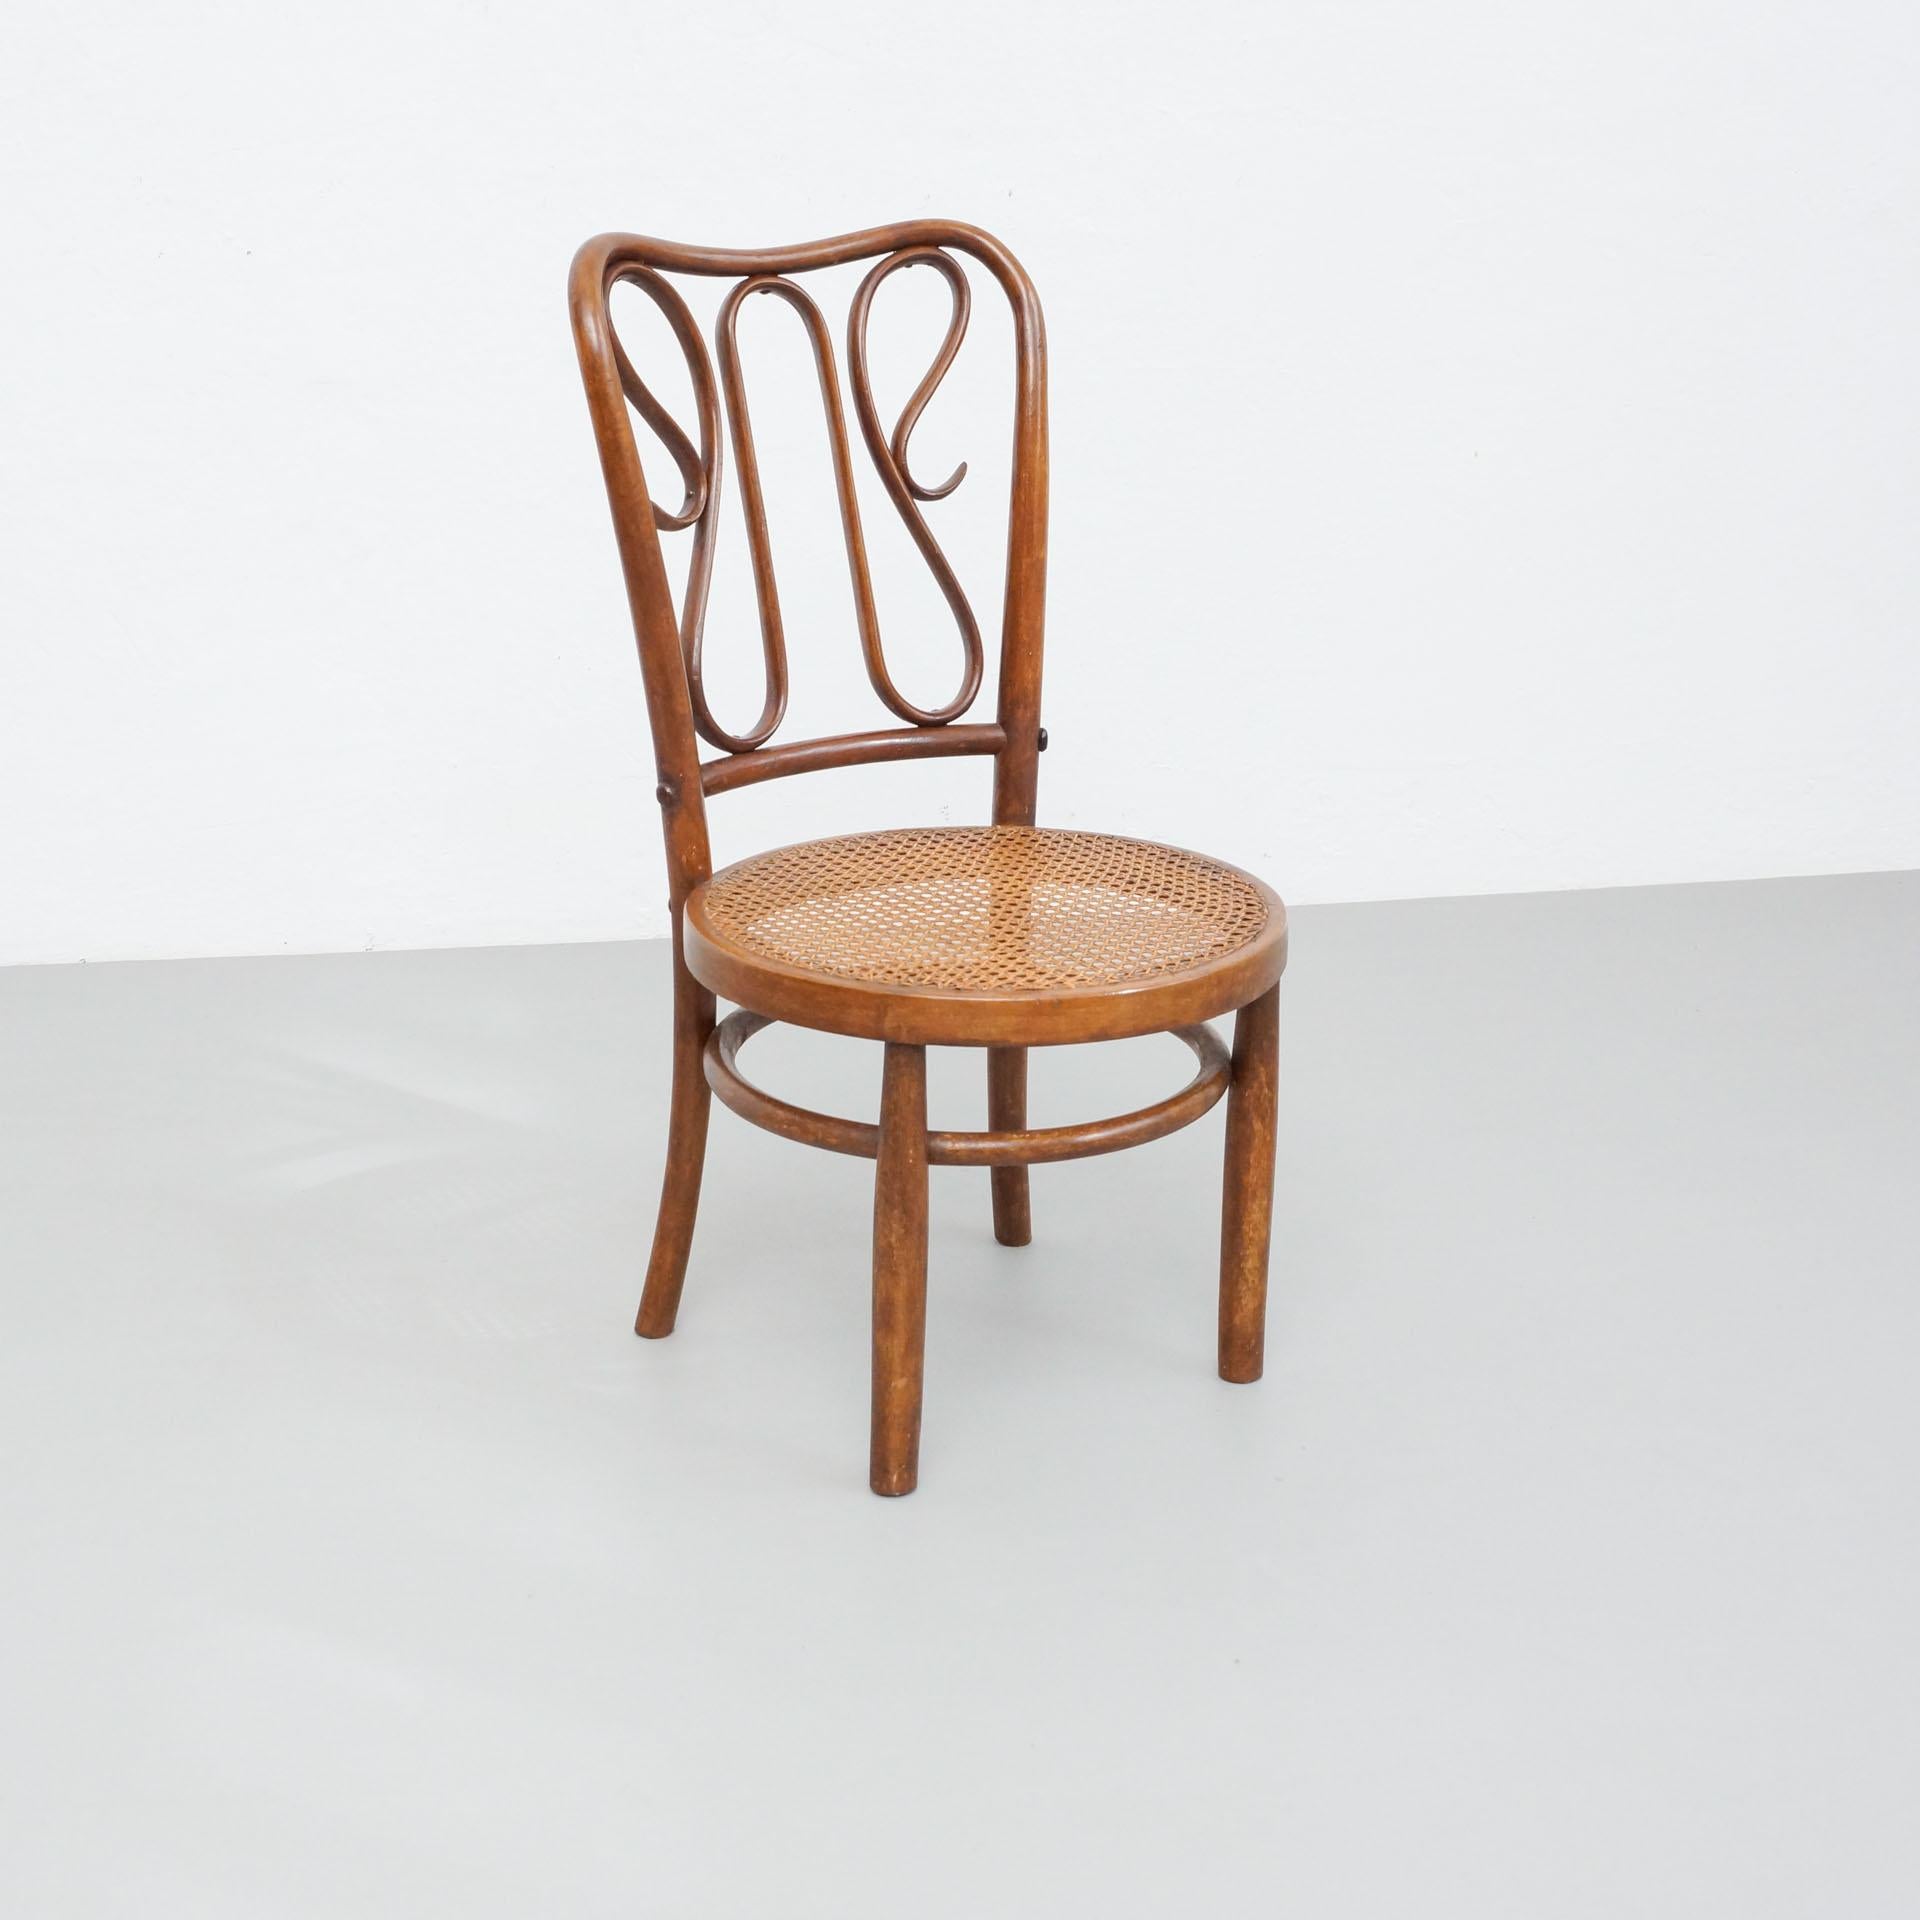 Bentwood Chair in the Style of Thonet, Rattan and Wood, circa 1940 For Sale 1